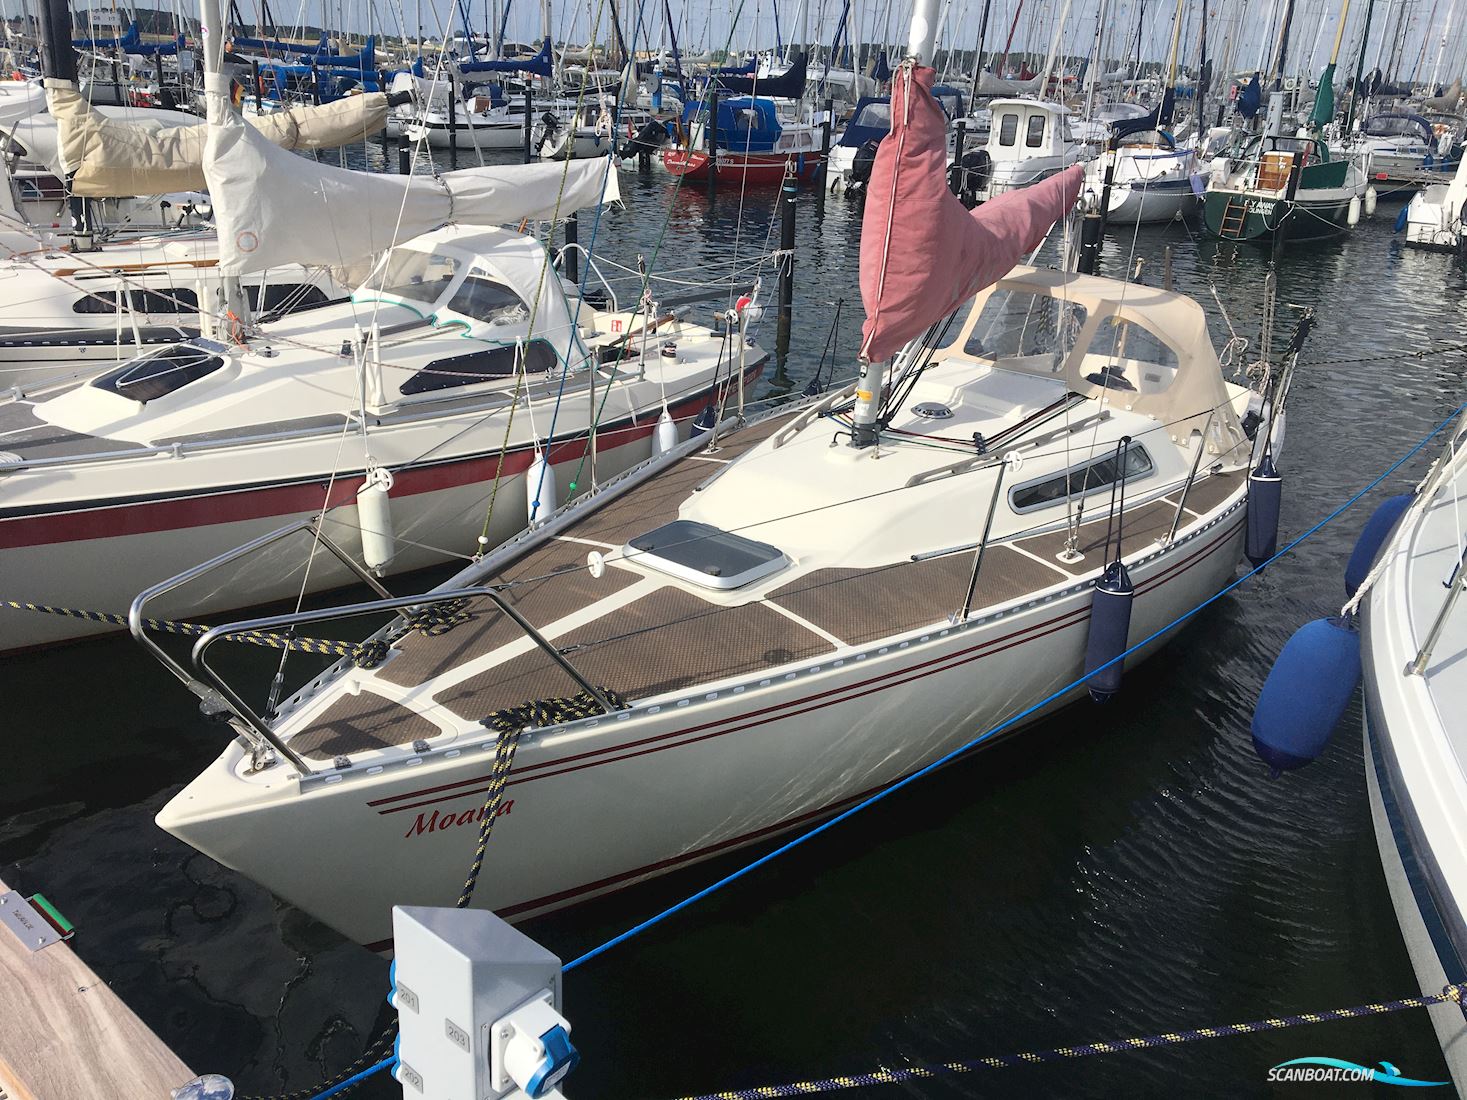 Larsen 25 Sailing boat 1988, with Vire 12 engine, Germany